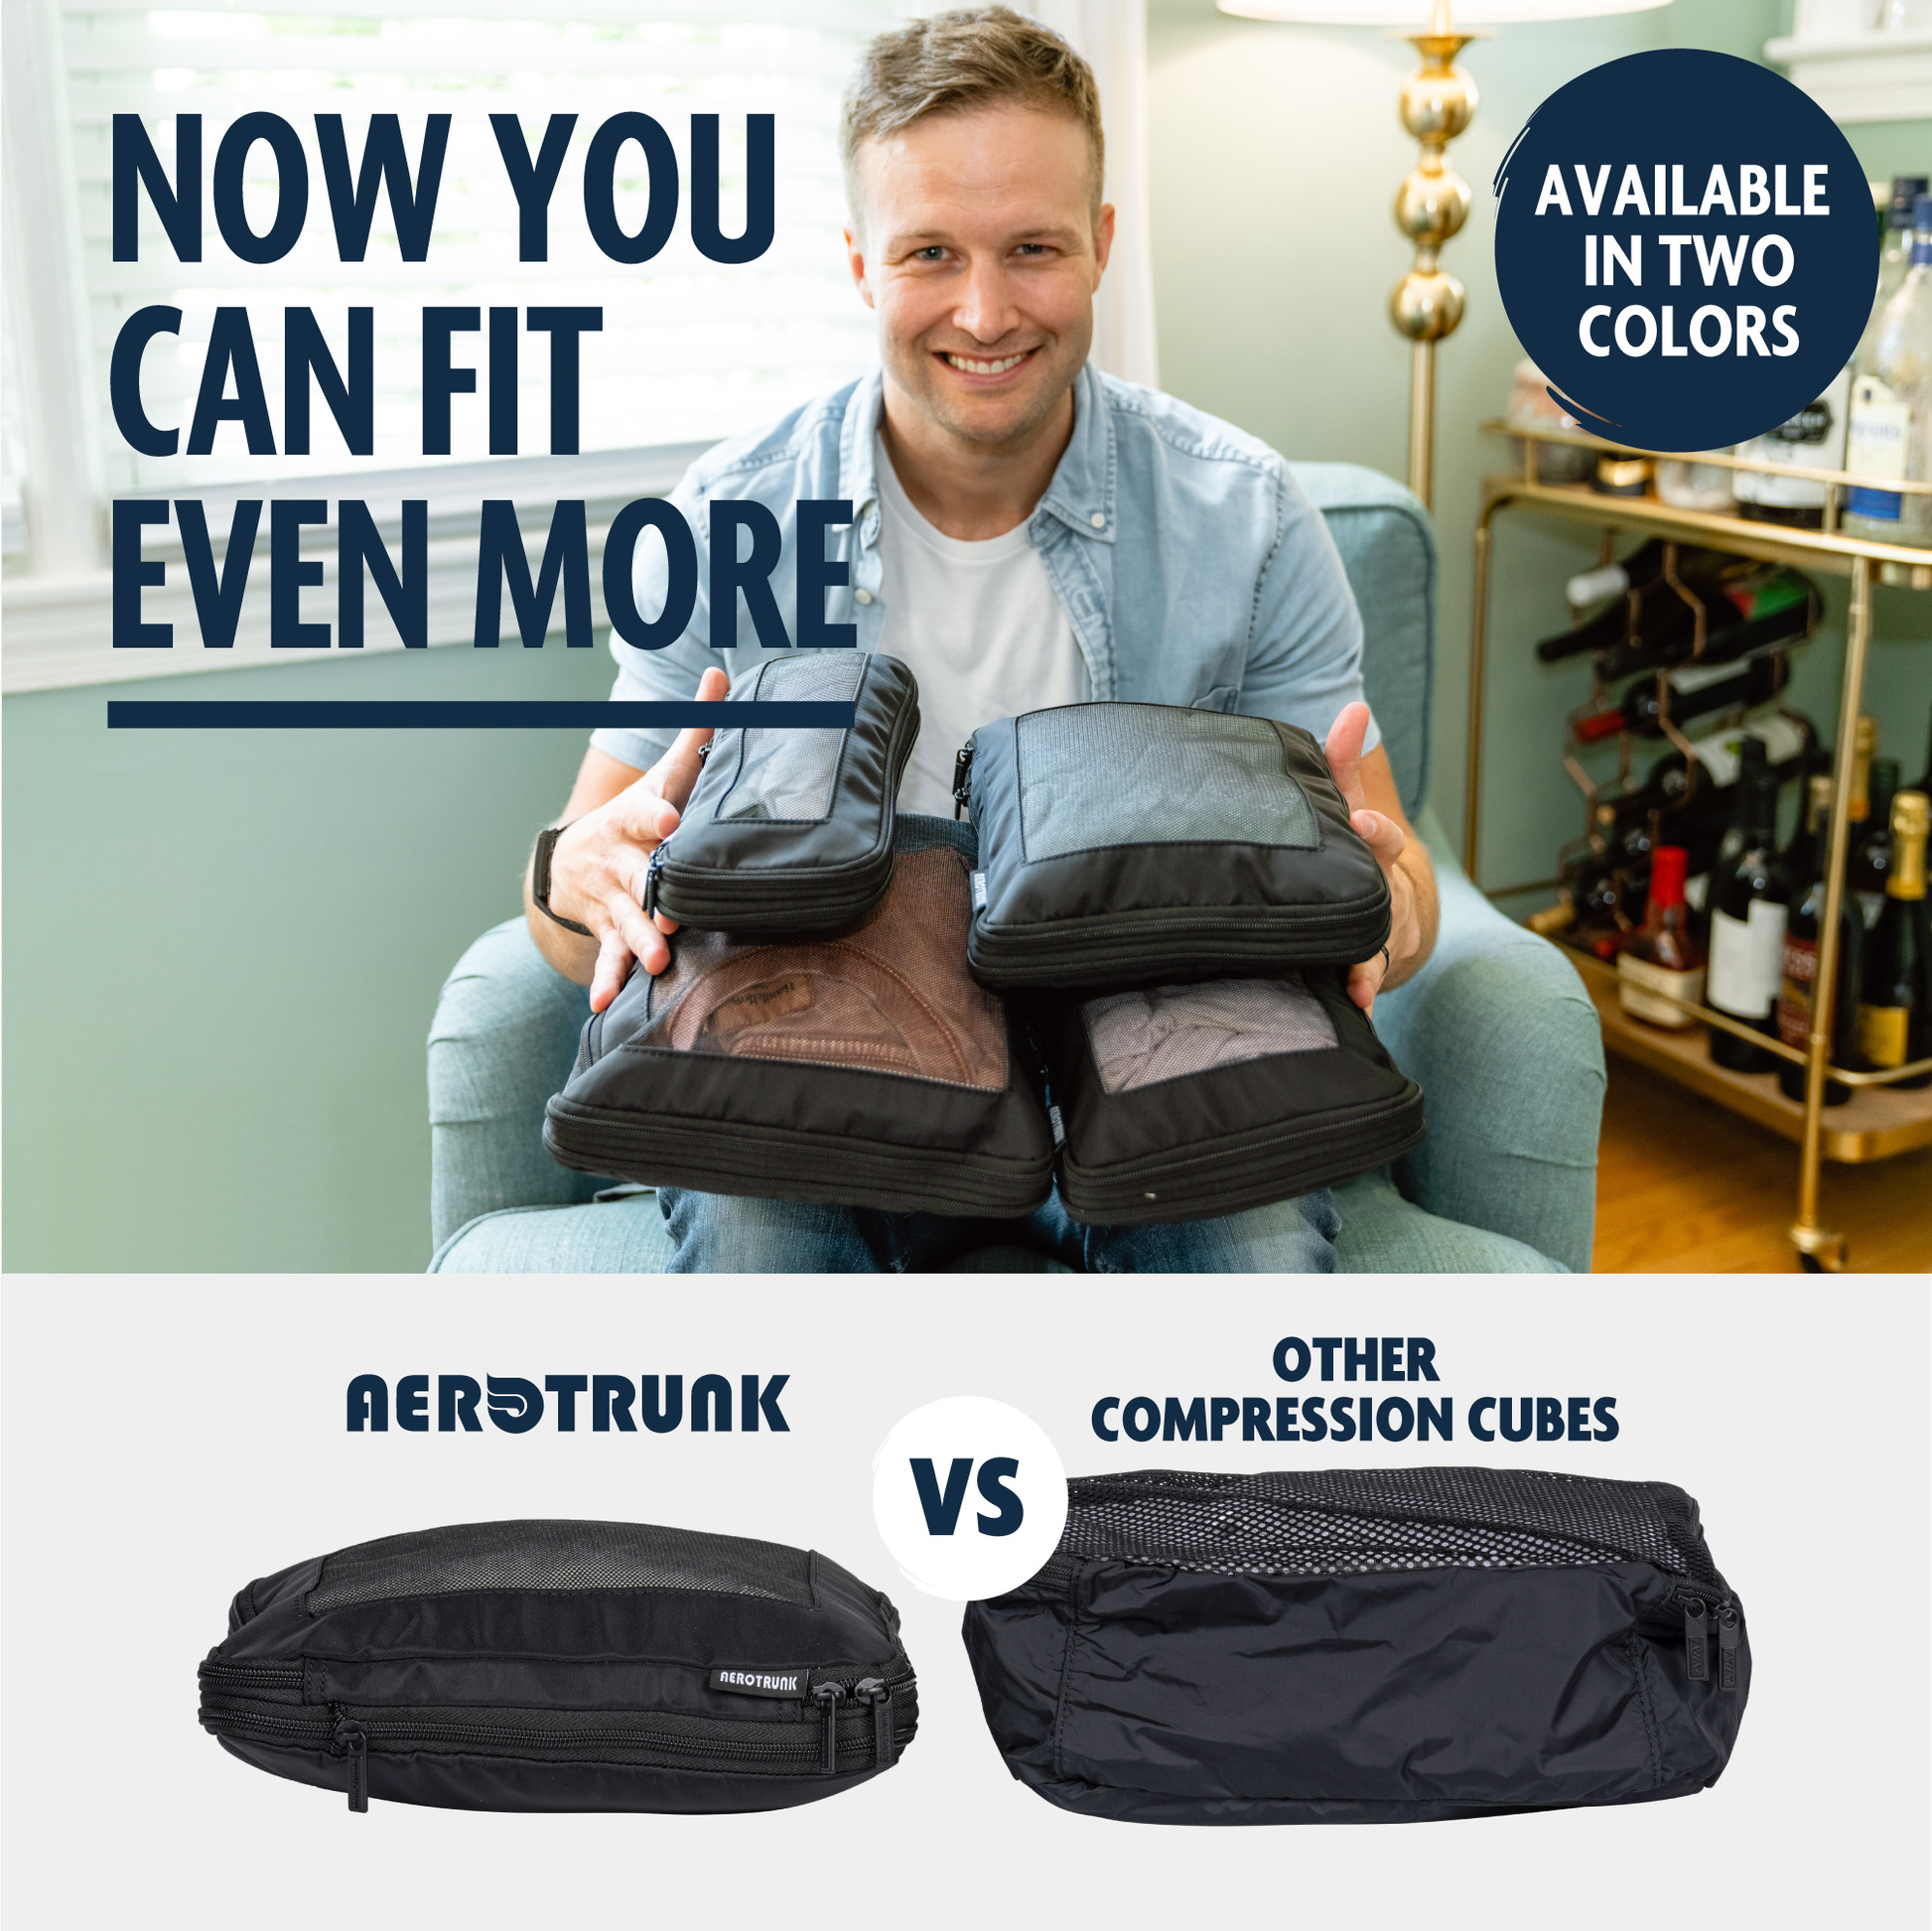 Compression Bags versus Packing Cubes: Which is Better for Packing? 